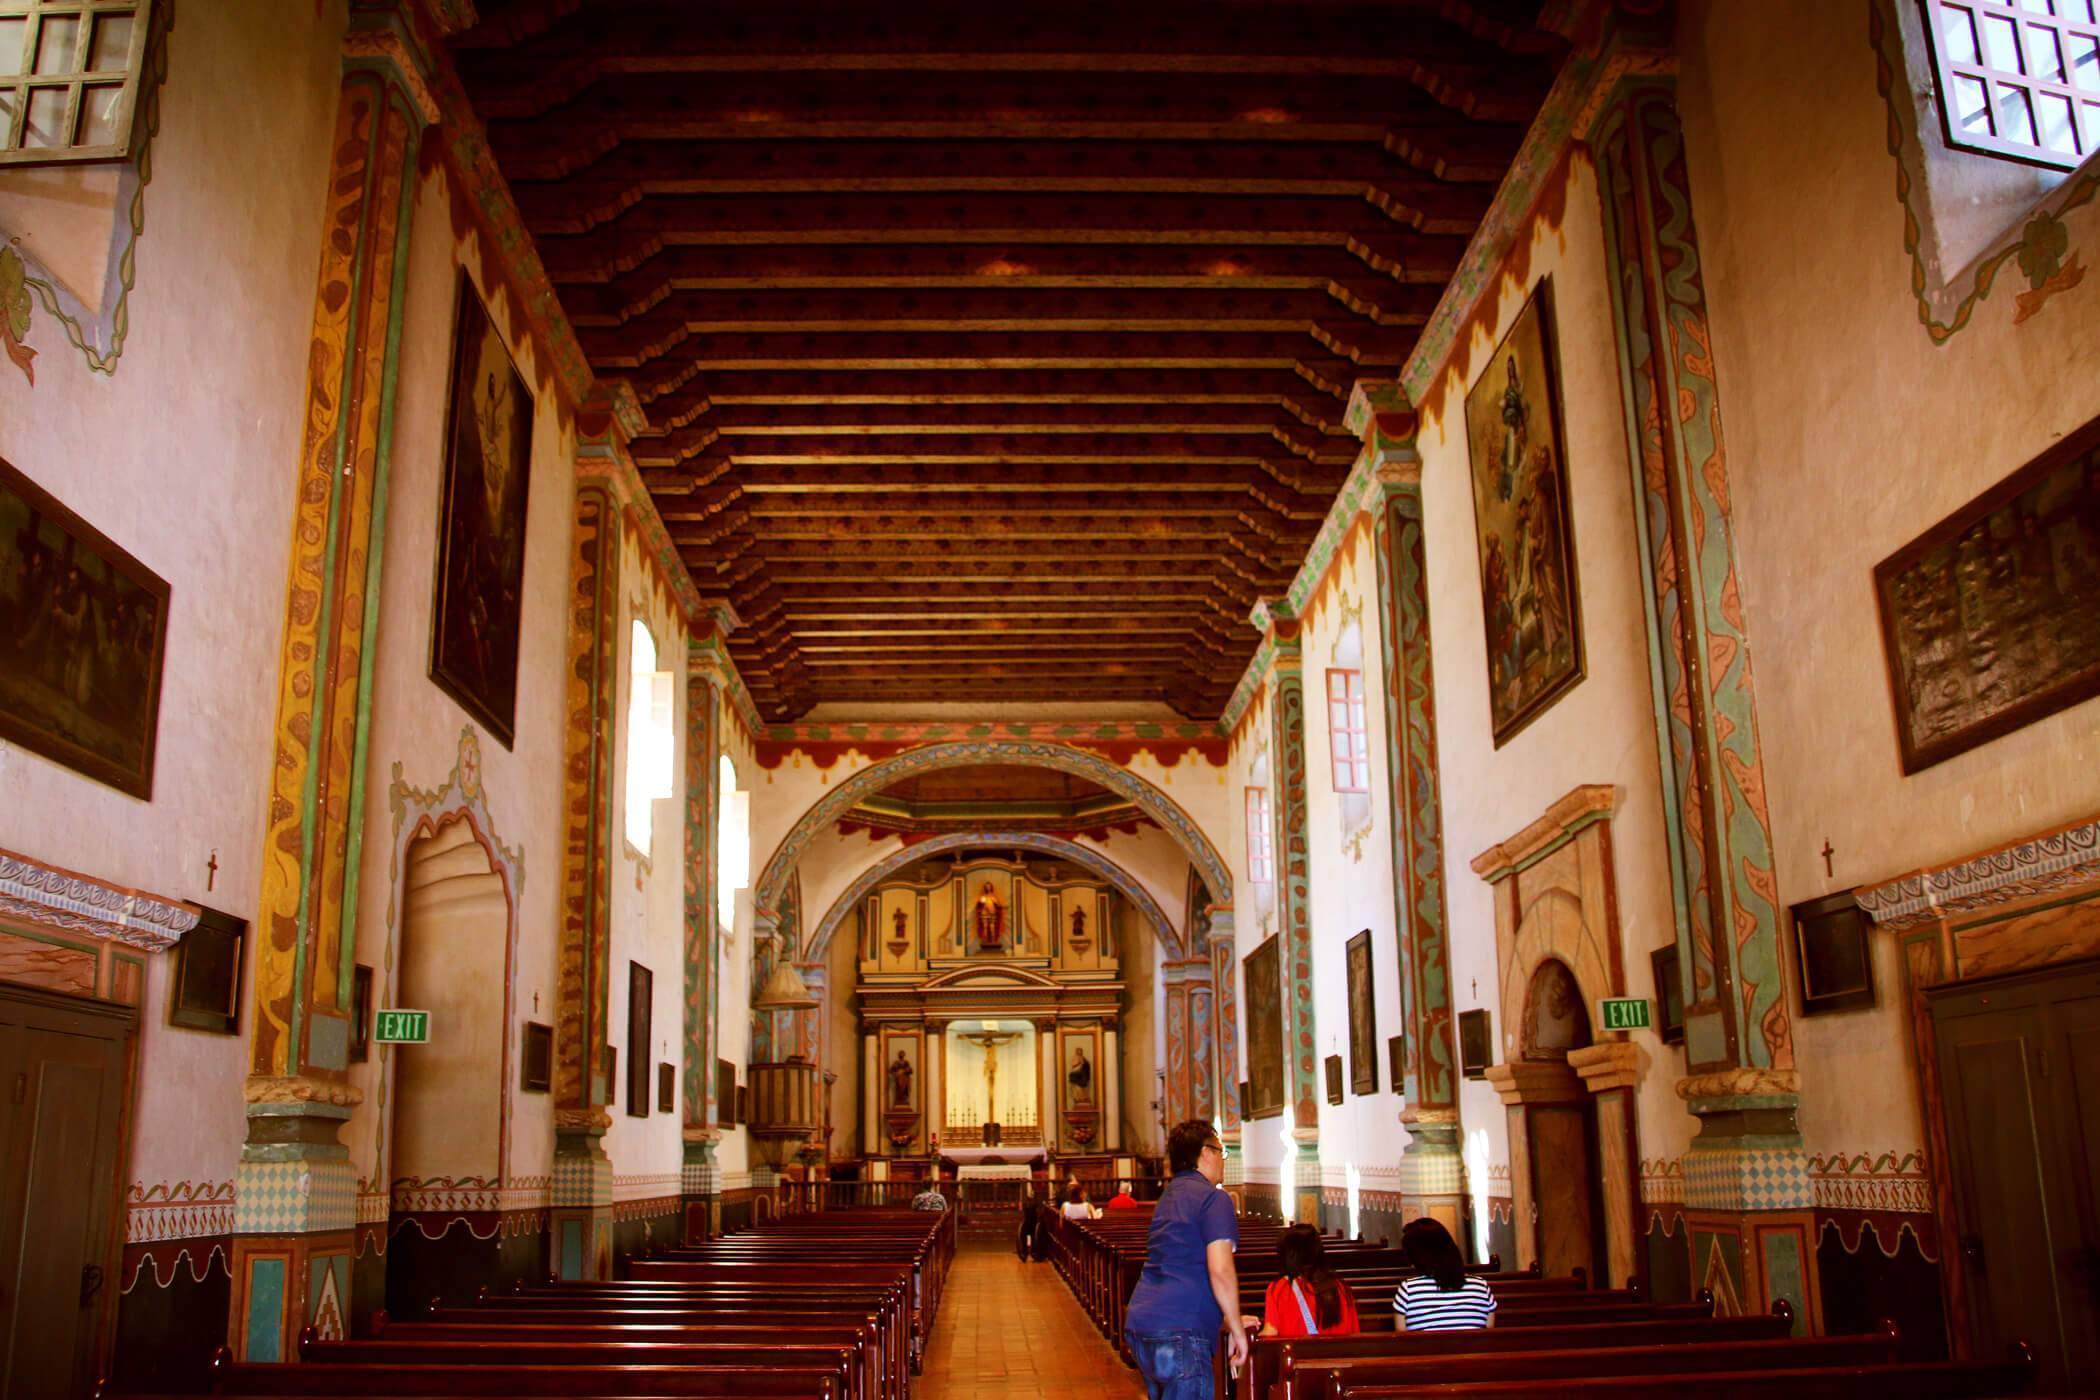 Visit the San Luis Rey Mission in Oceanside. This is one of Southern California's historic missions and gorgeous in real life!